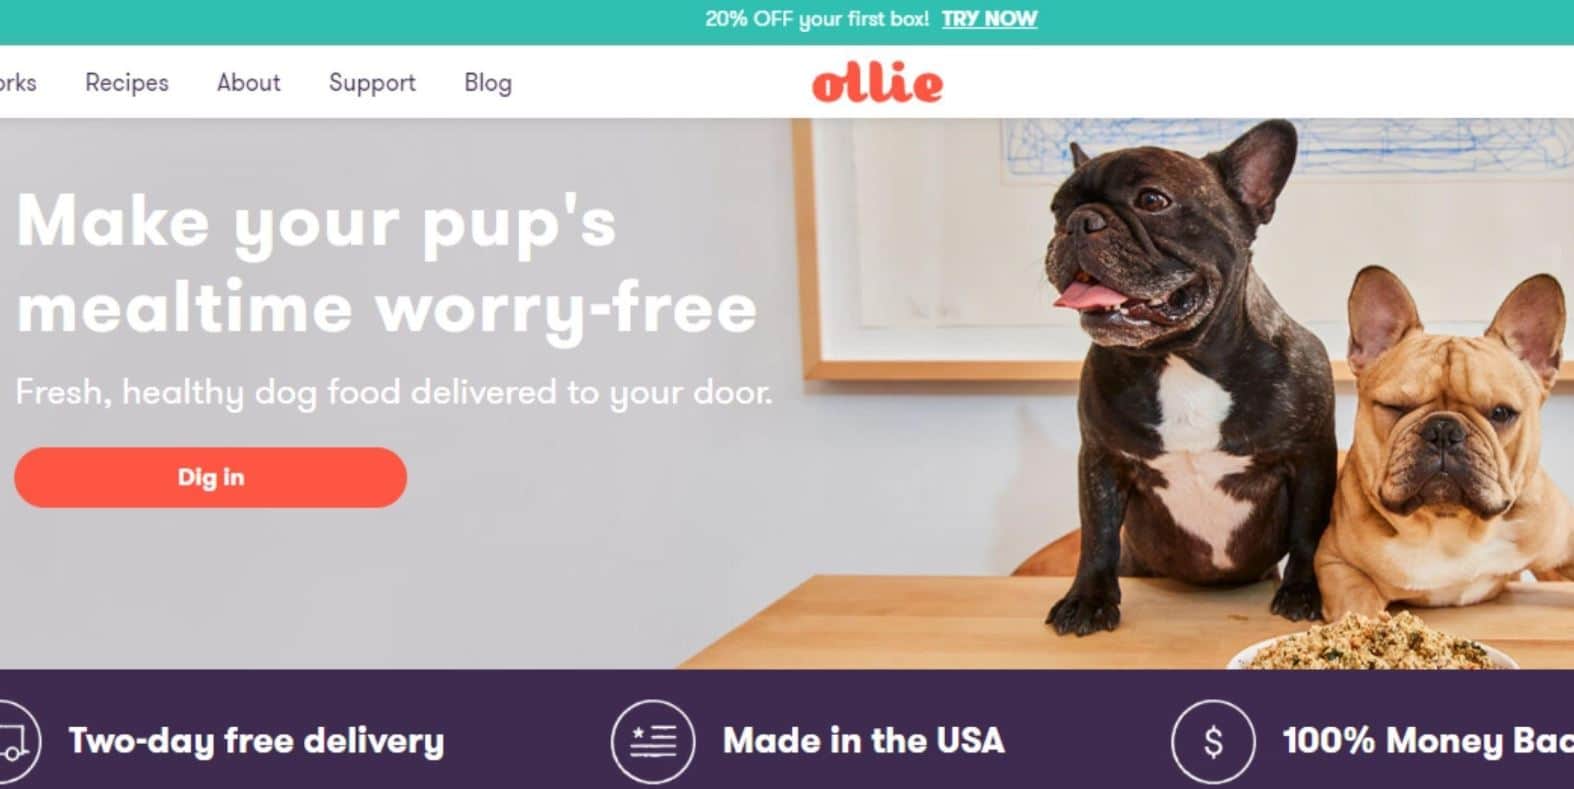 Prudent Pet chooses Ollie as the best pet food company 